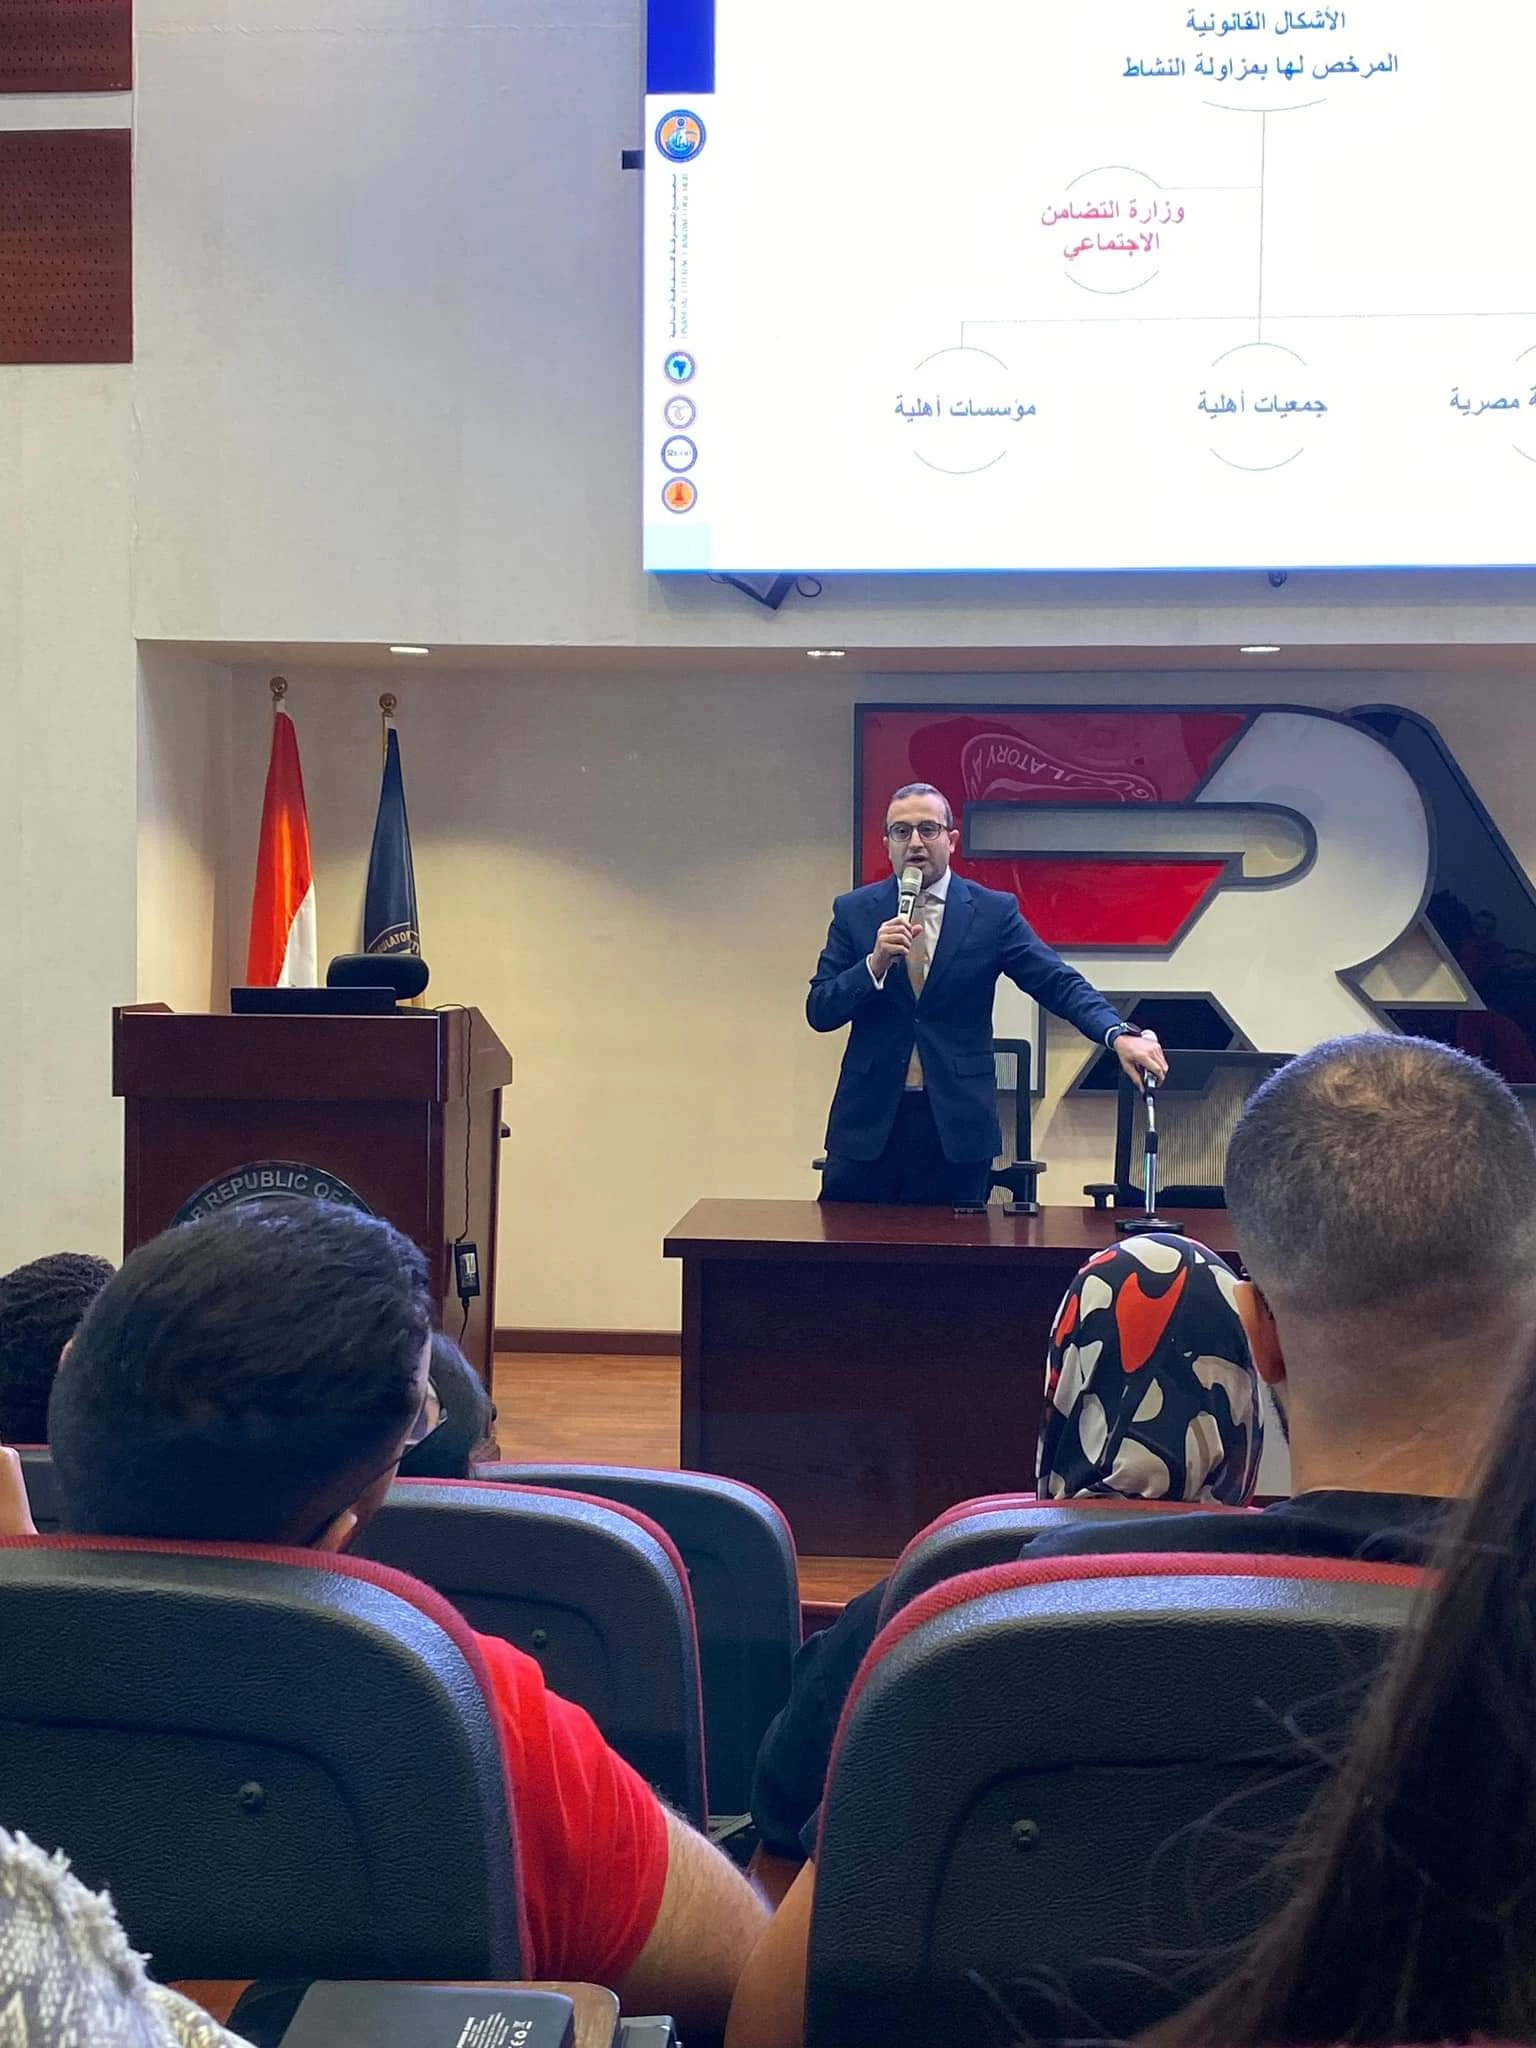 The Department of cultural and social activity in Miami organized a scientific trip to the headquarters of the General Authority for financial supervision in the smart village in Cairo on: 8/11/202316